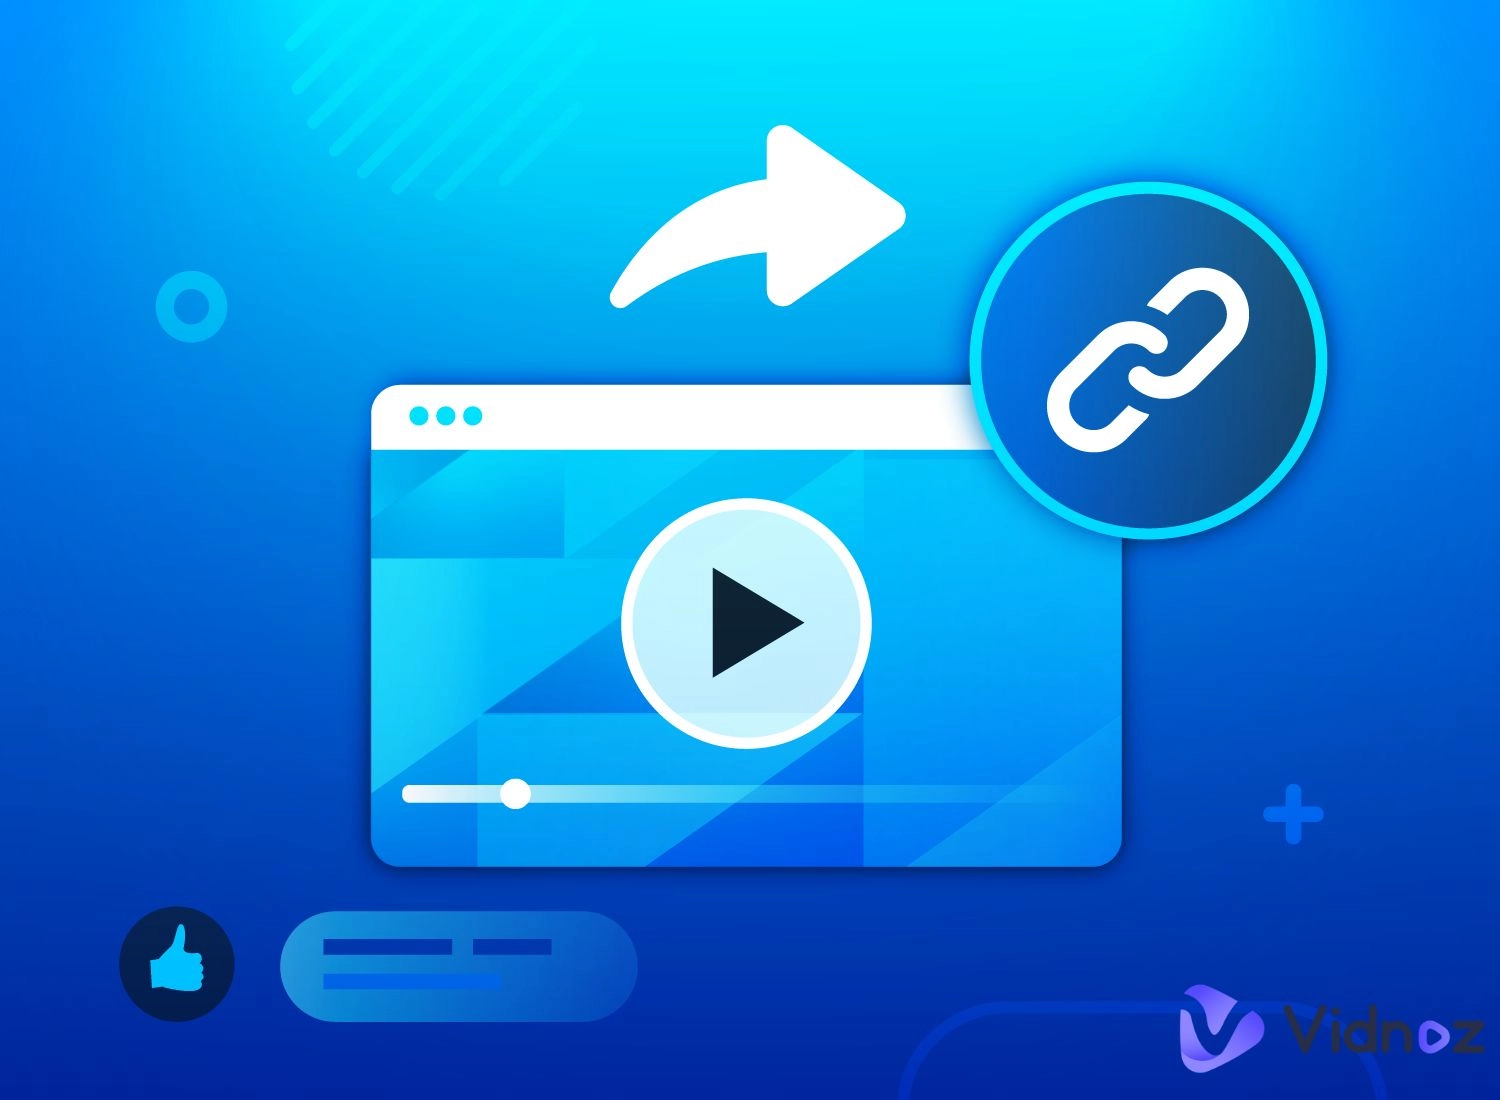 Best 5 Video Link Generators - Make Video and Share It in 1 Link